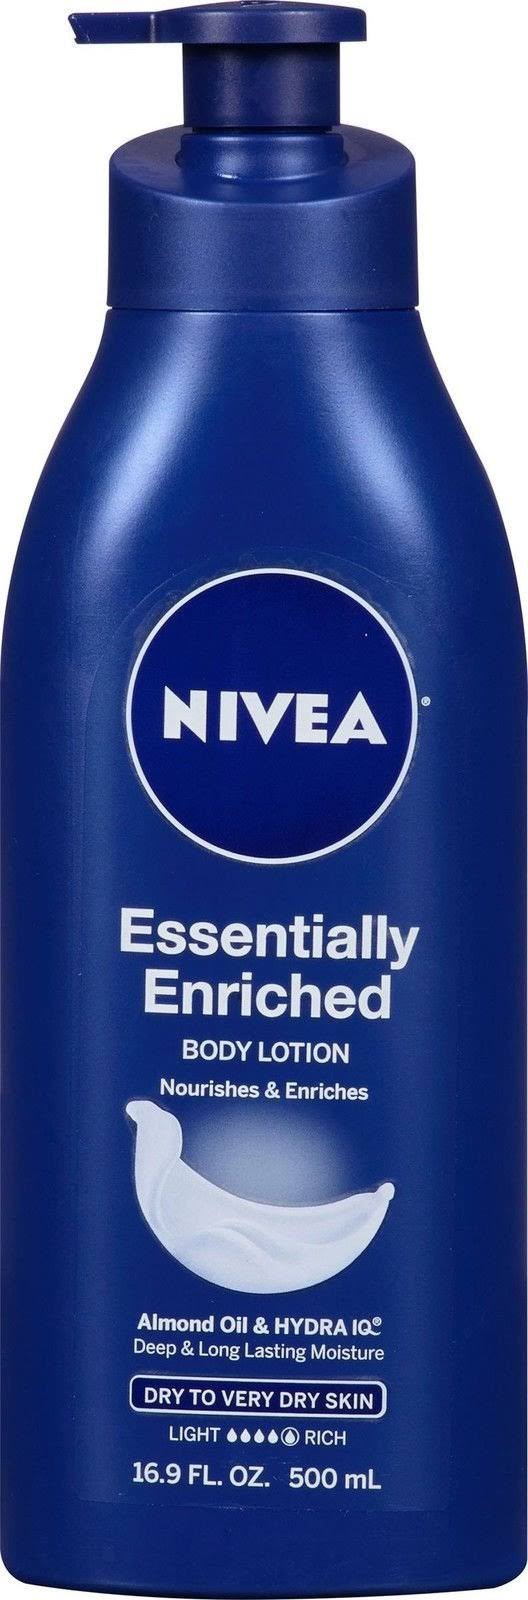 Nivea Essentially Enriched Body Lotion - 500ml